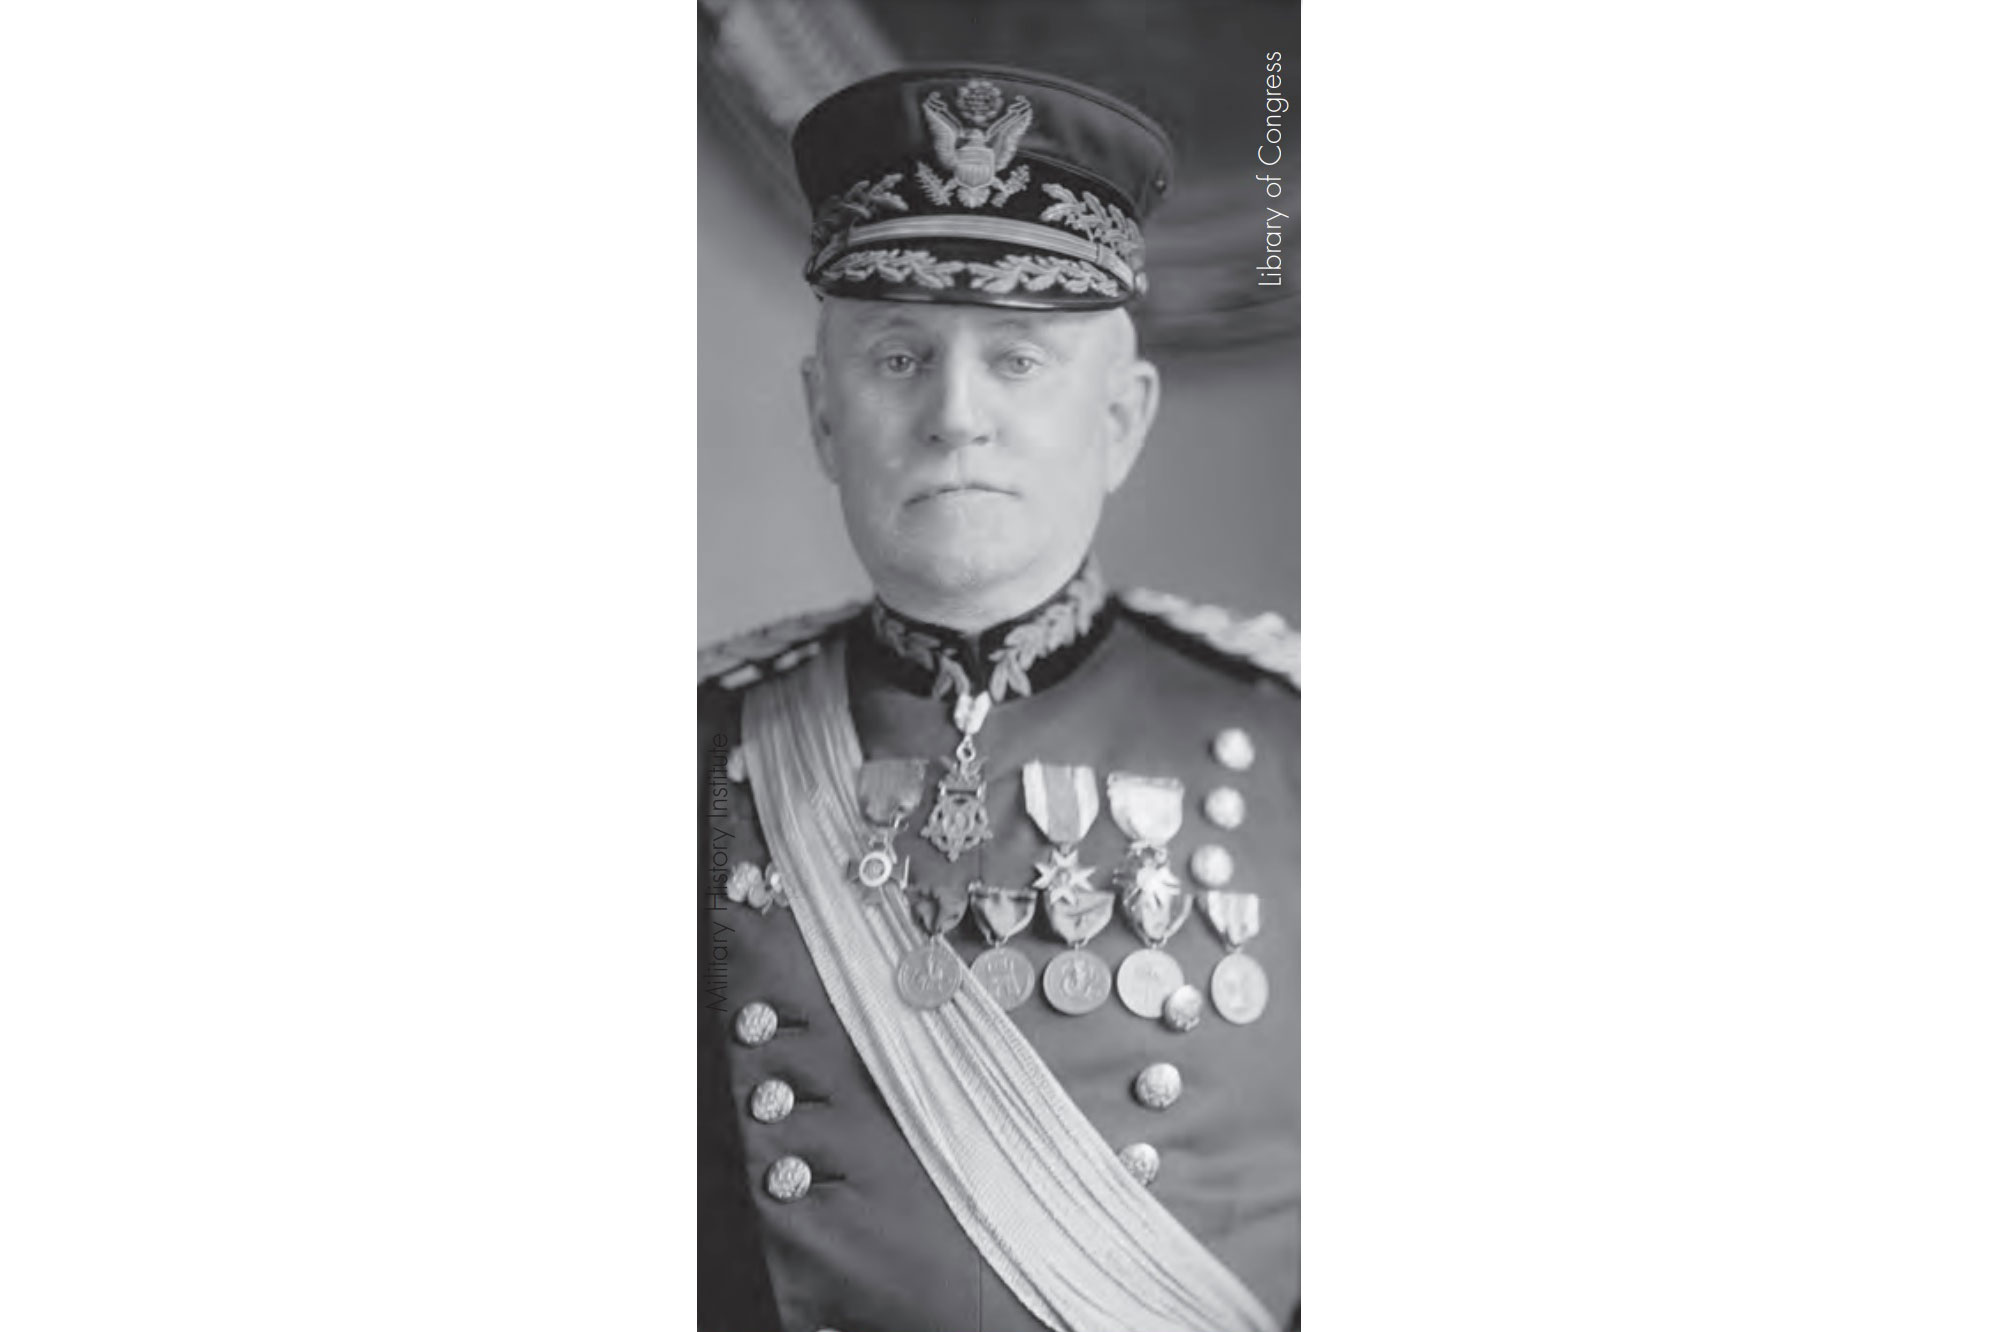 Charles F. Humphrey, shown here as a major general, c. 1907.